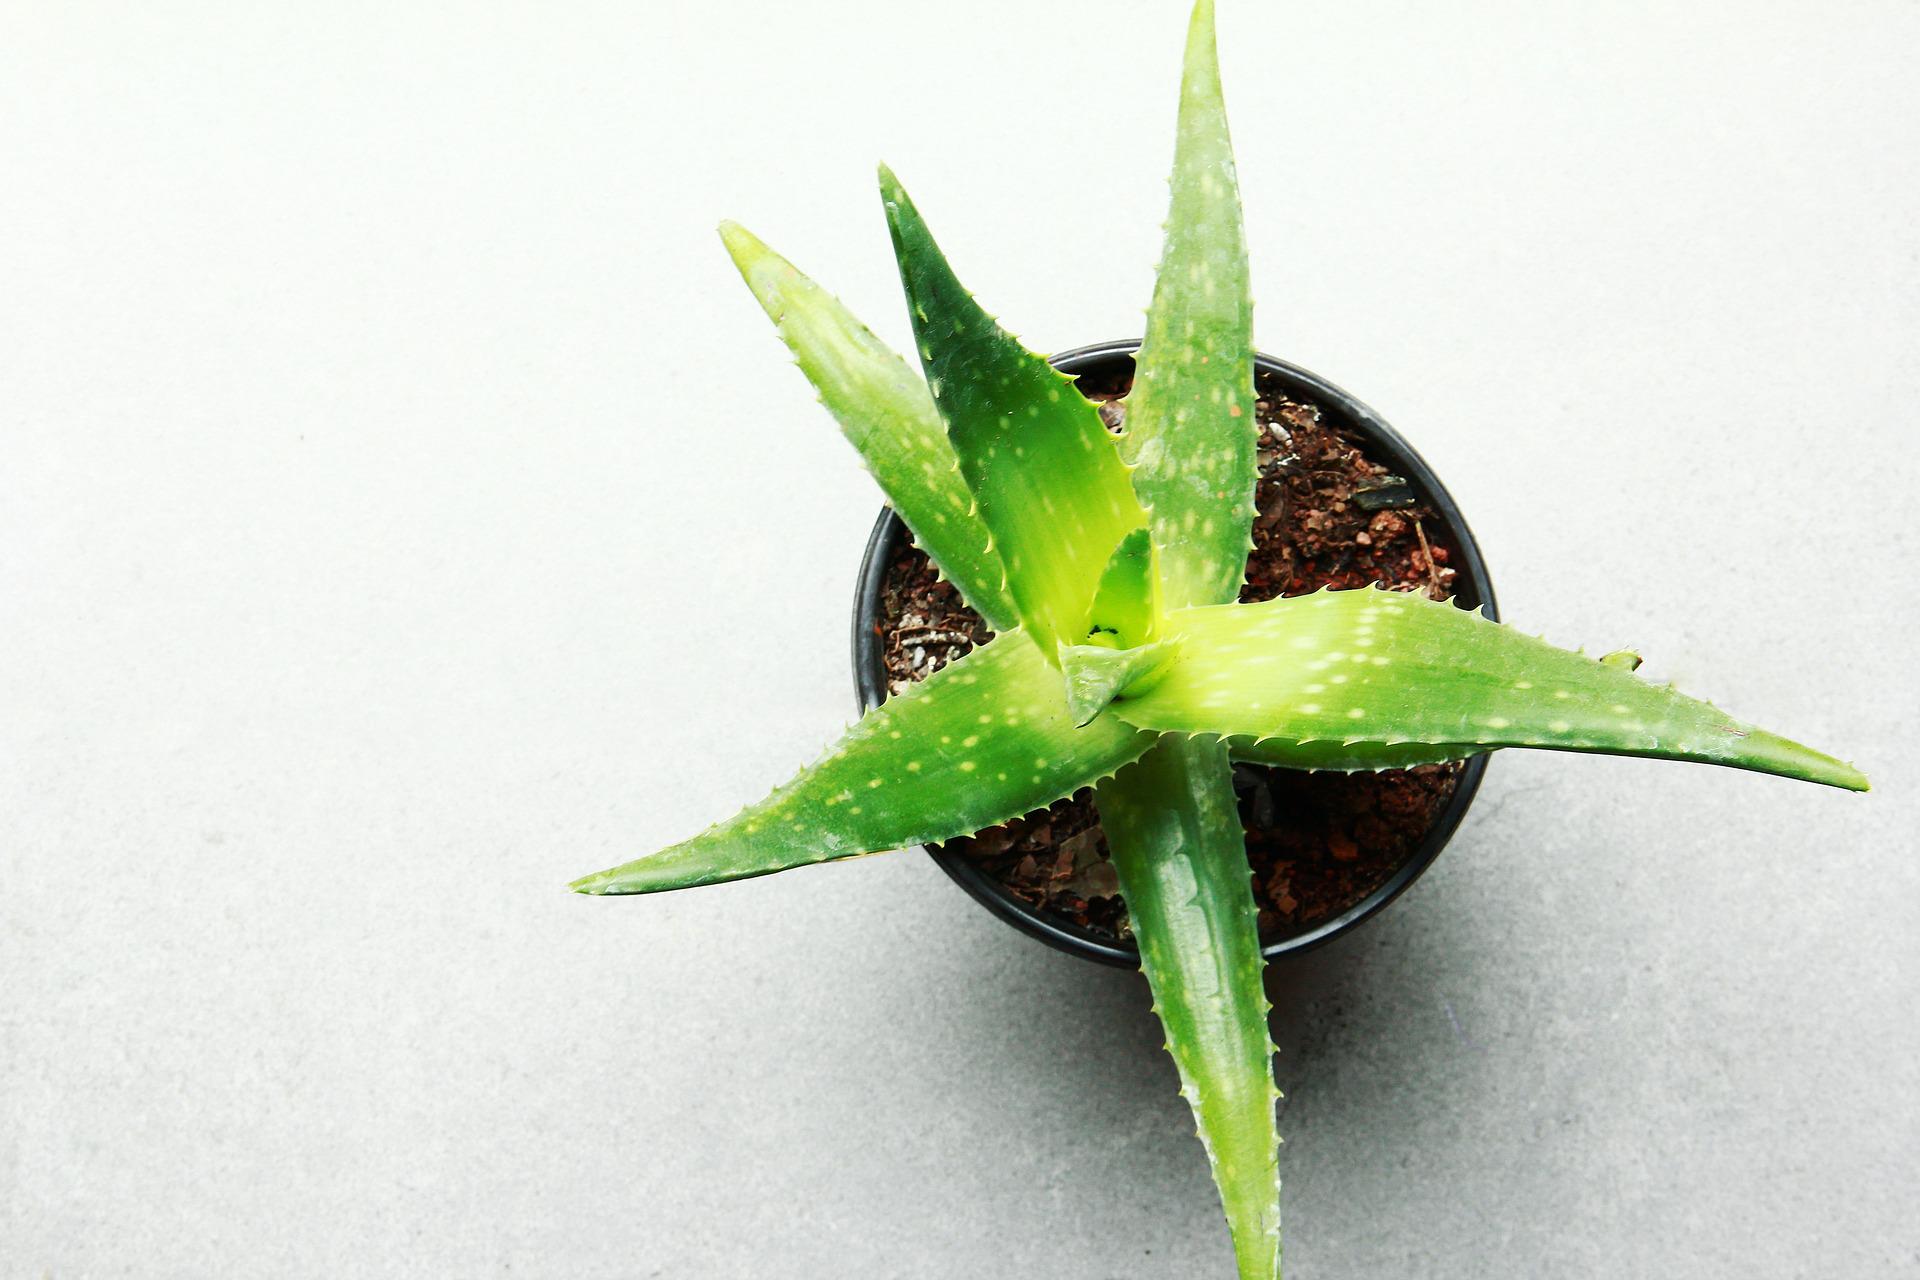 A mottled green, spiky aloe vera plant in a black pot, photographed from above, on a white background.